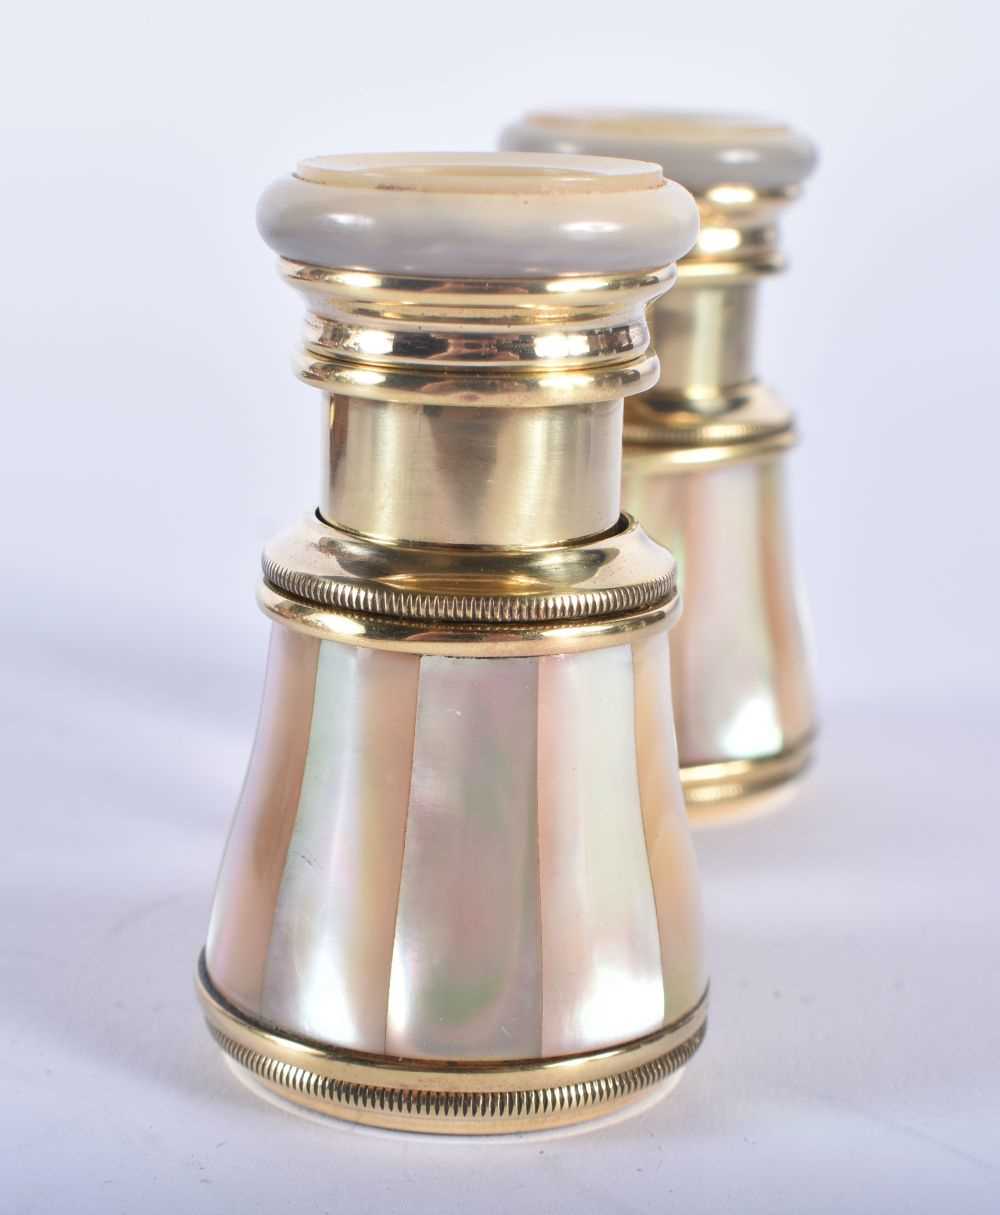 A PAIR OF MOTHER OF PEARL OPERA GLASSES. 9 cm x 9 cm extended. - Image 2 of 5